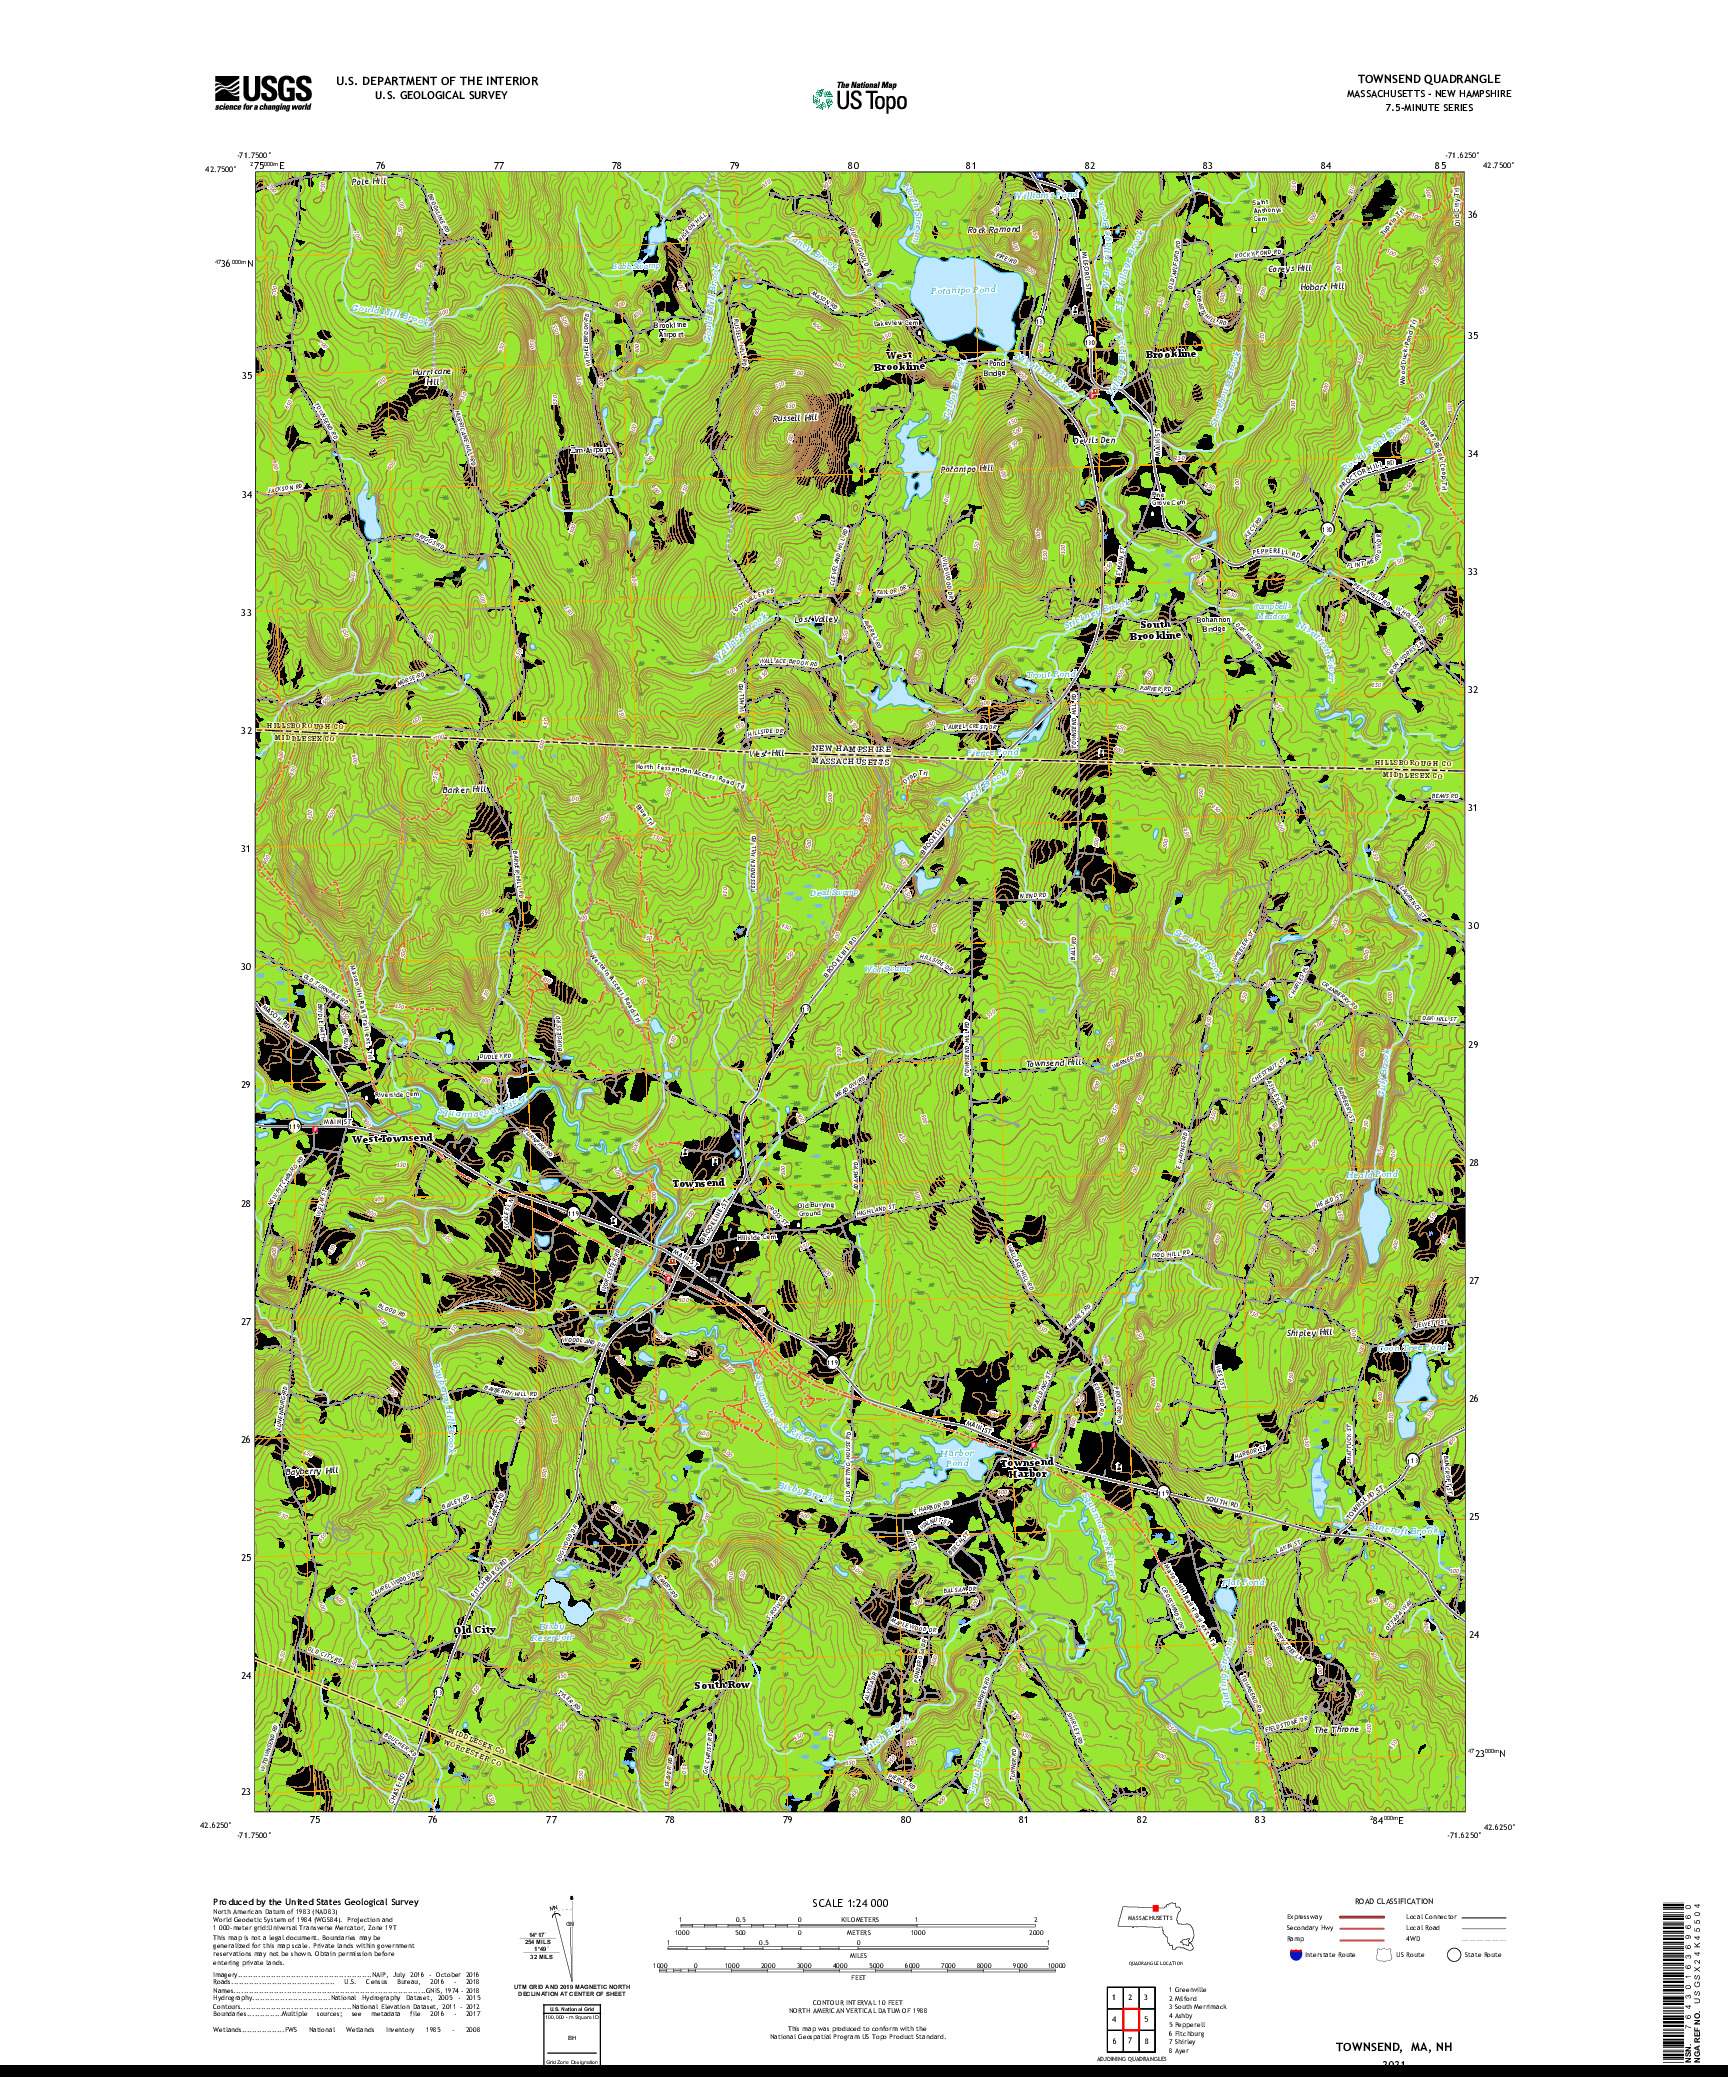 USGS US TOPO 7.5-MINUTE MAP FOR TOWNSEND, MA,NH 2021